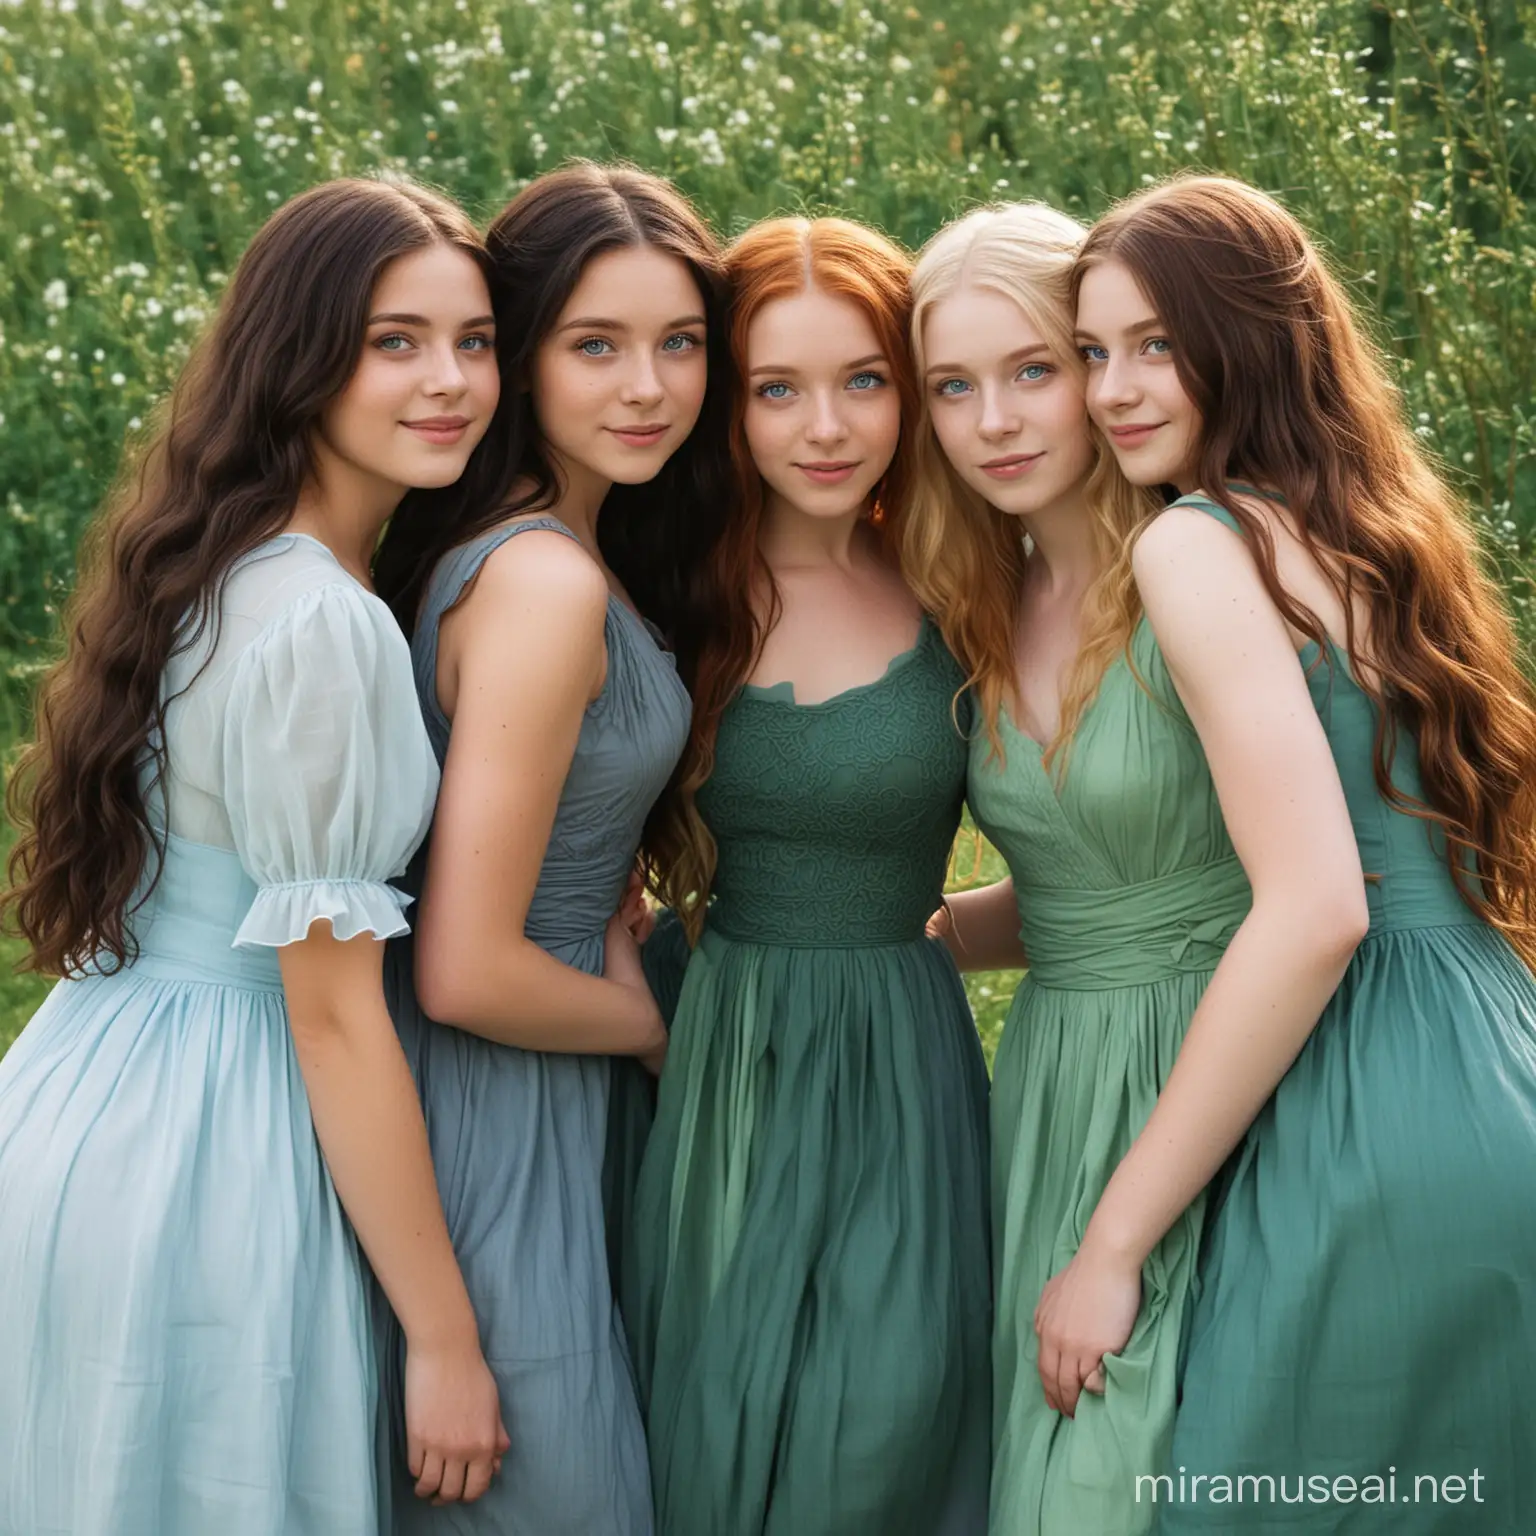 Five Sisters Embracing in Soft Colored Dresses